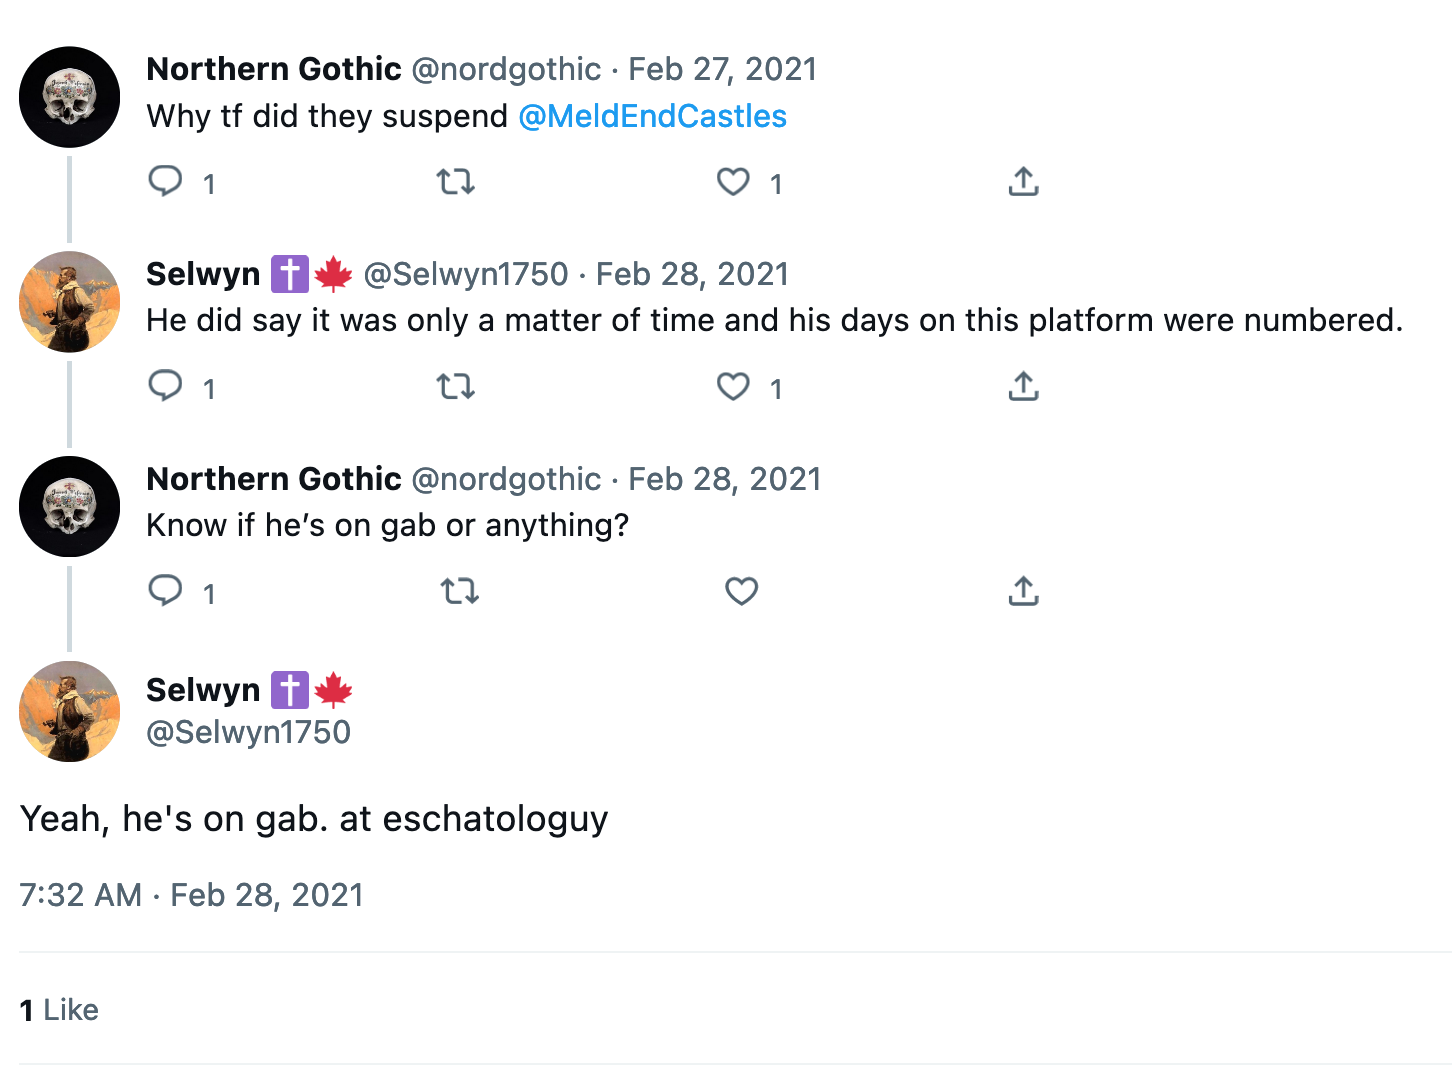 Exchange between Twitter users Northern Gothic and Selwyn about why @MeldendCastles was suspended. Selwyn says that MeldendCastles is now "on gab. at eschatologuy." Dated Feb. 28, 2021. 